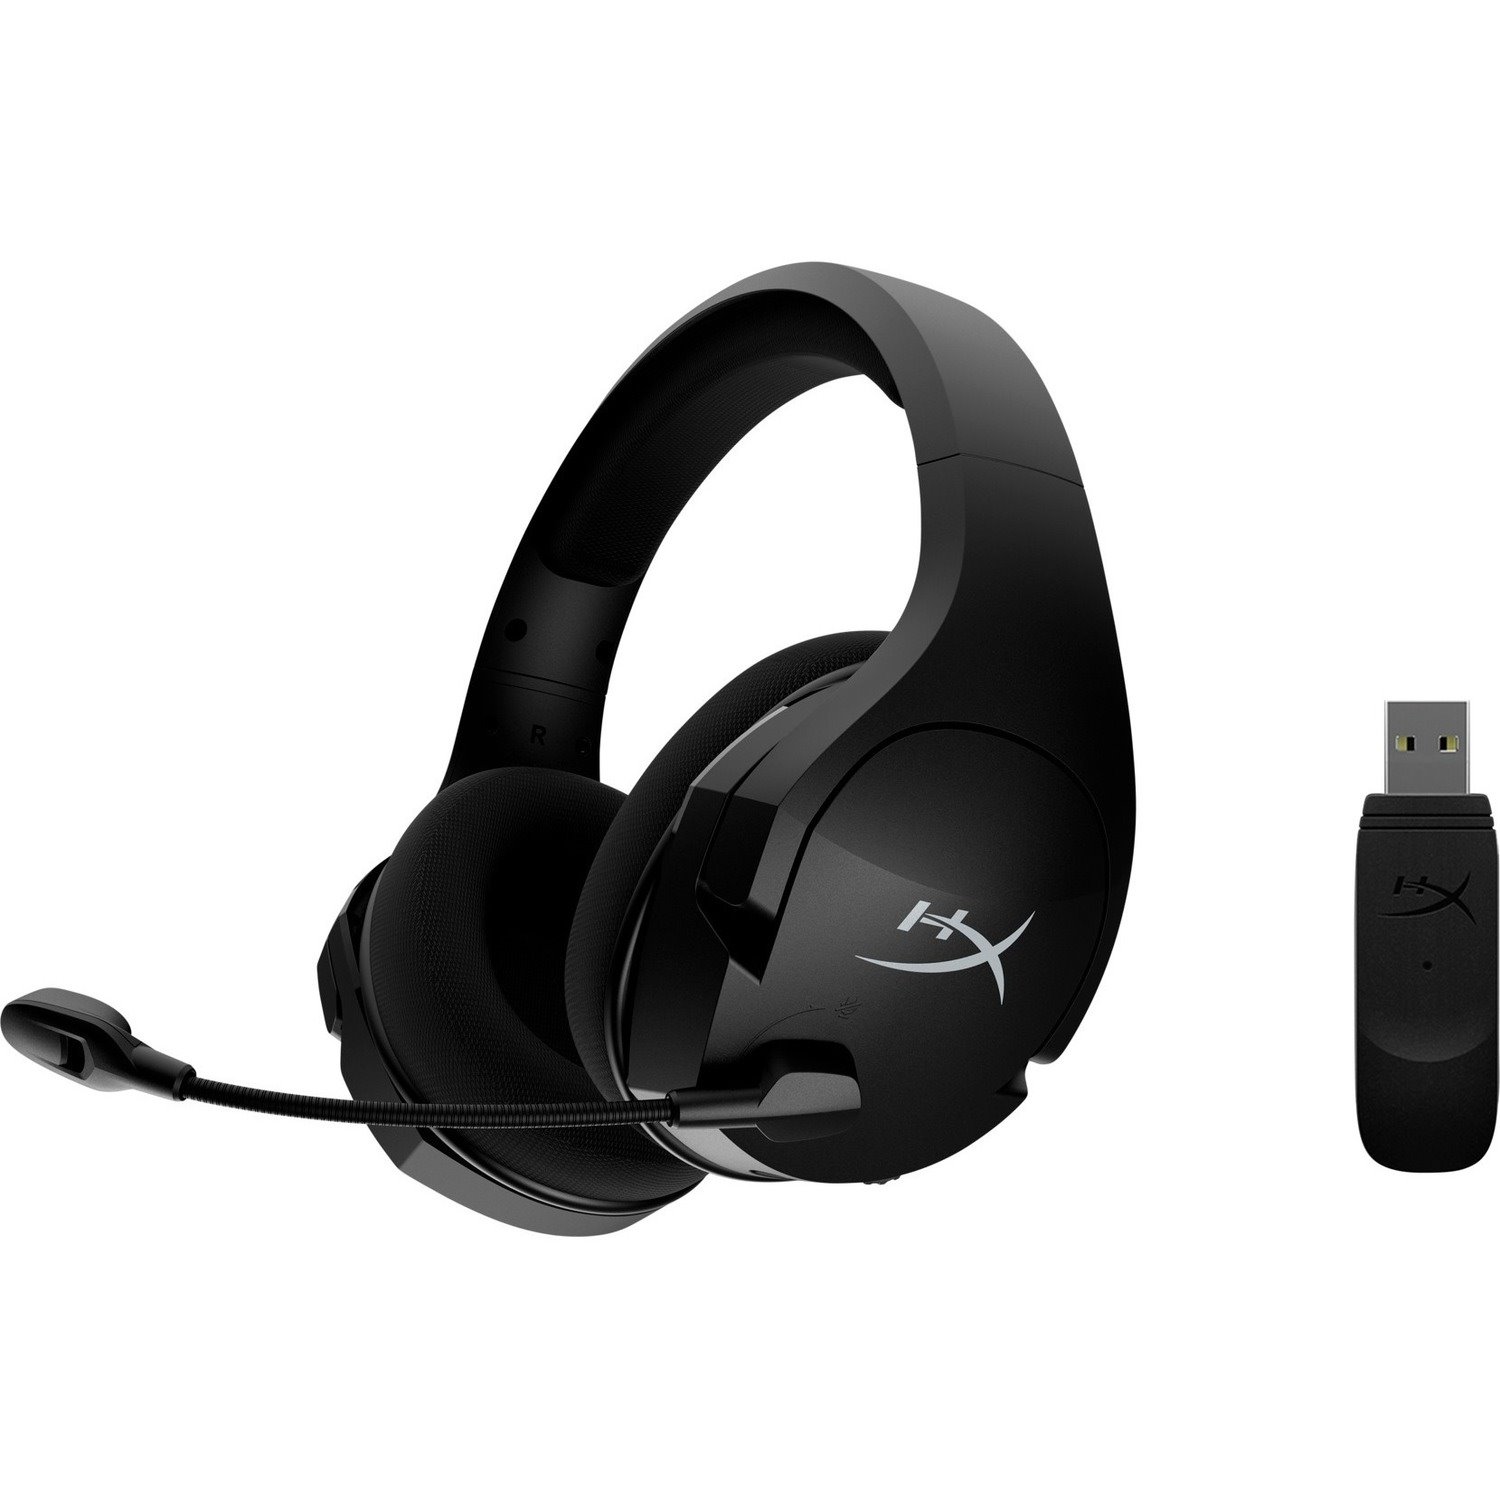 HyperX Cloud Stinger Core Wireless Over-the-head Stereo Gaming Headset - Black